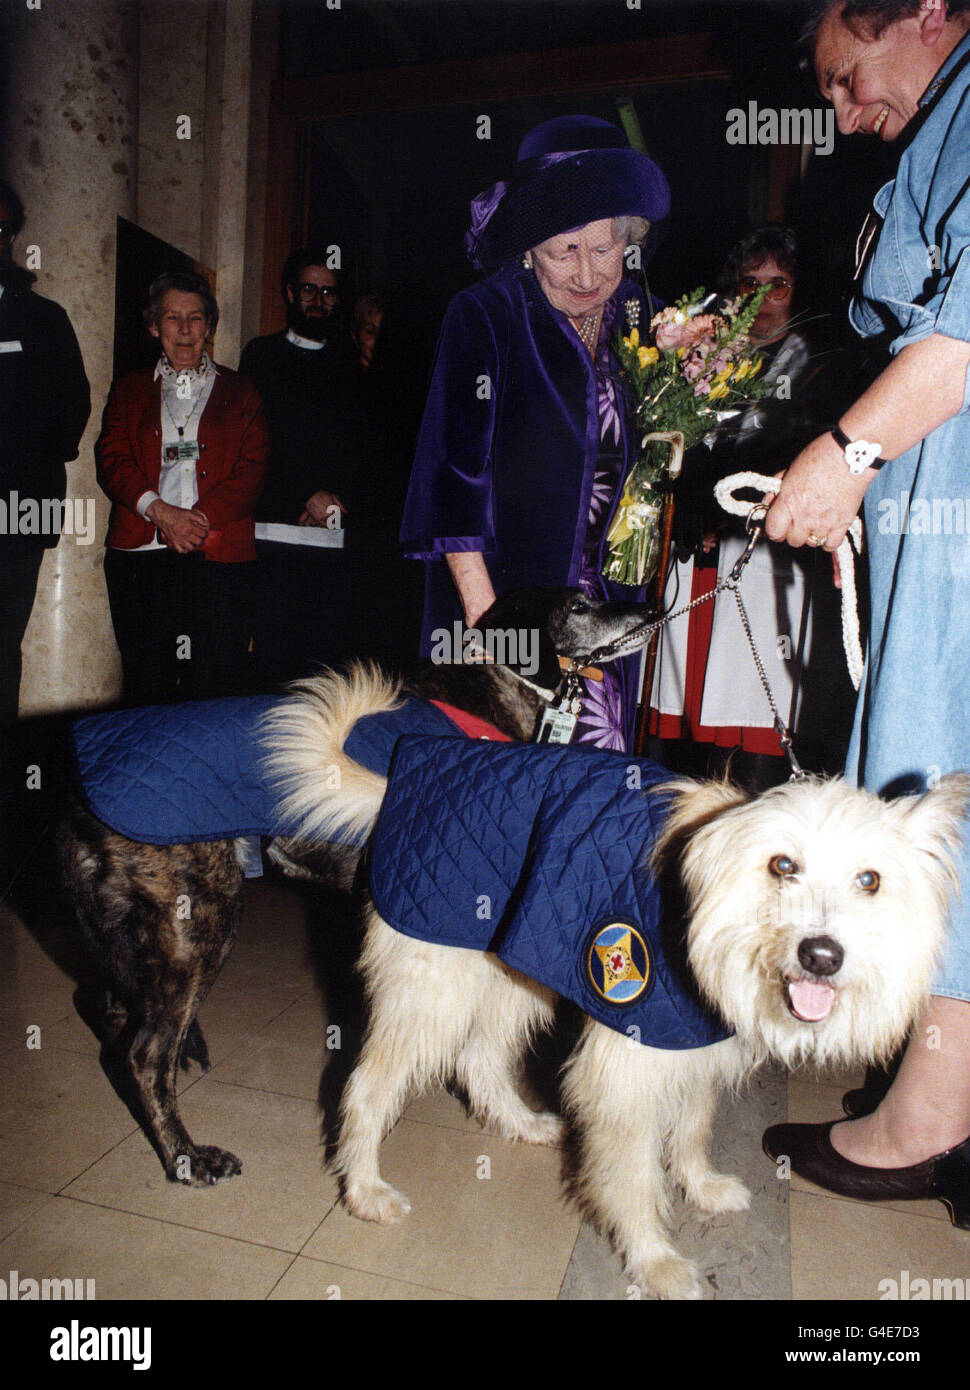 THE QUEEN MOTHER MEETS IS INTRODUCED TO TWO CANINE RESIDENTS OF THE STAR AND GARTER HOME FOR EX-SERVICEMEN AND WOMEN IN RICHMOND, SURREY. THE QUEEN MOTHER OFFICIALLY OPENED THE BLACK WATCH SUITE DURING HER VISIT TO THE HOME. Stock Photo